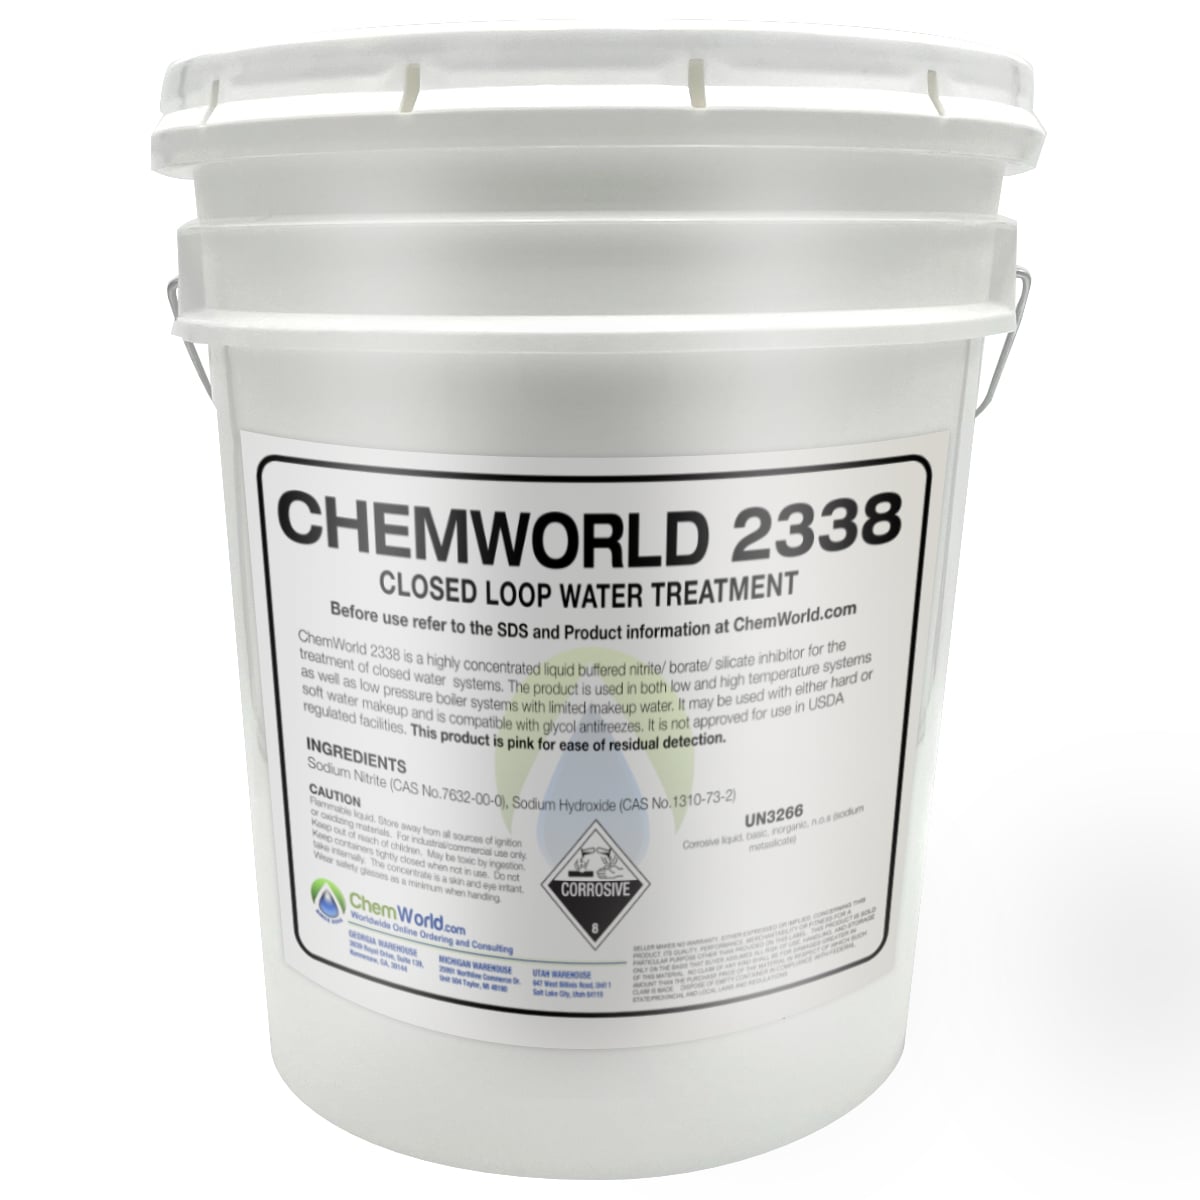 As long as the Nitrite levels are right your system is protected. Our Chemworld 2338 passivates the metal so it's not in contact with the actual water.